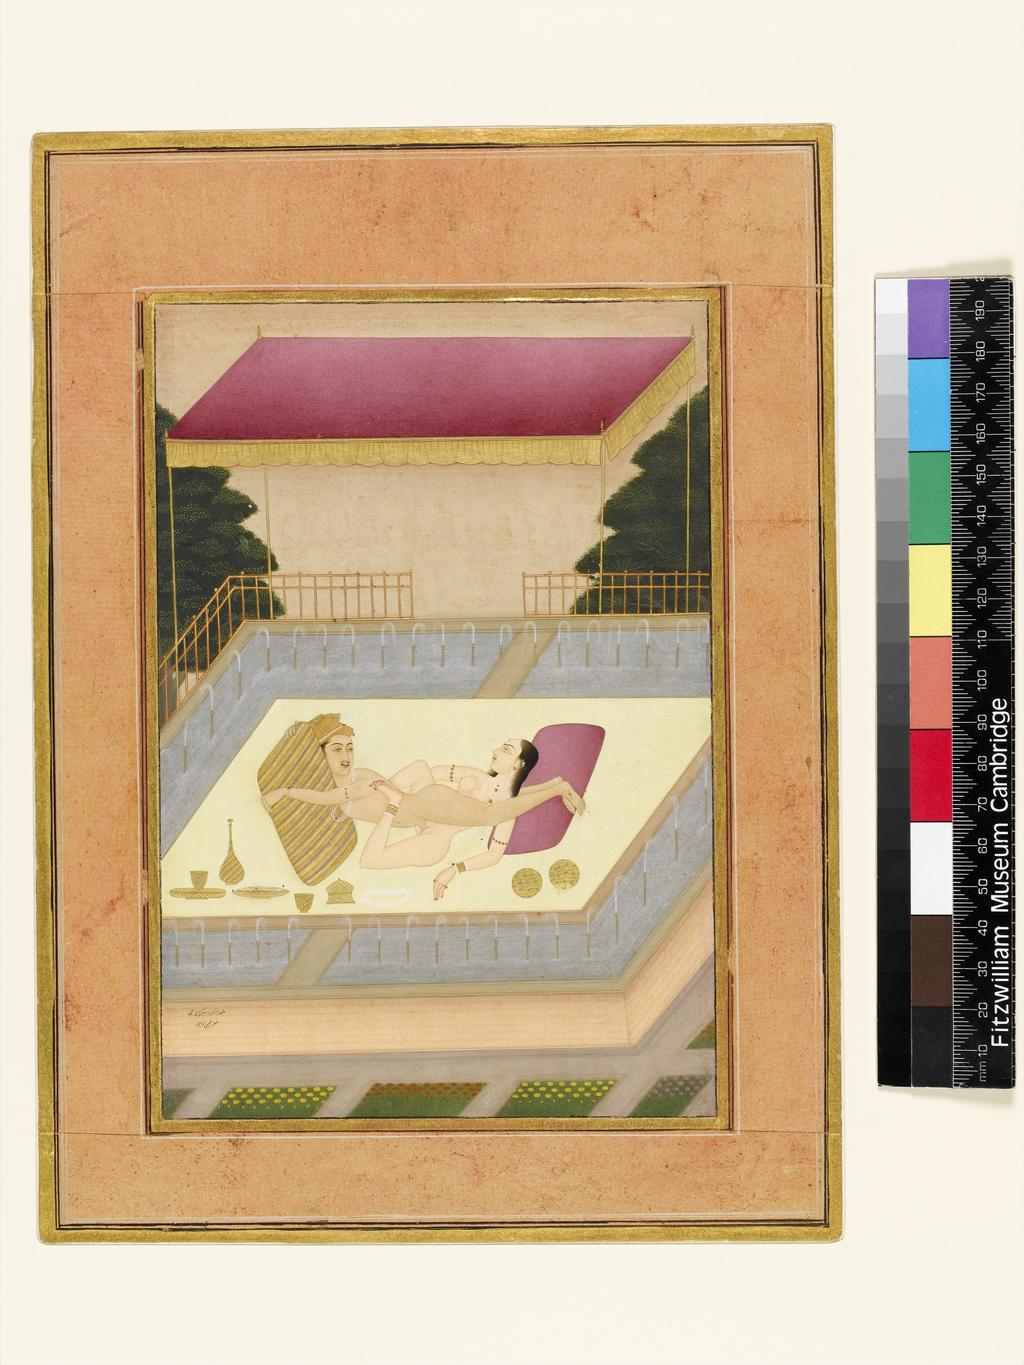 An image of The private pleasure of the Kunwar Meghraj Ji, by Lachmi Narain. Bodycolour including white, pen and ink with gold on paper, height 200mm, width 136mm, circa 1678.